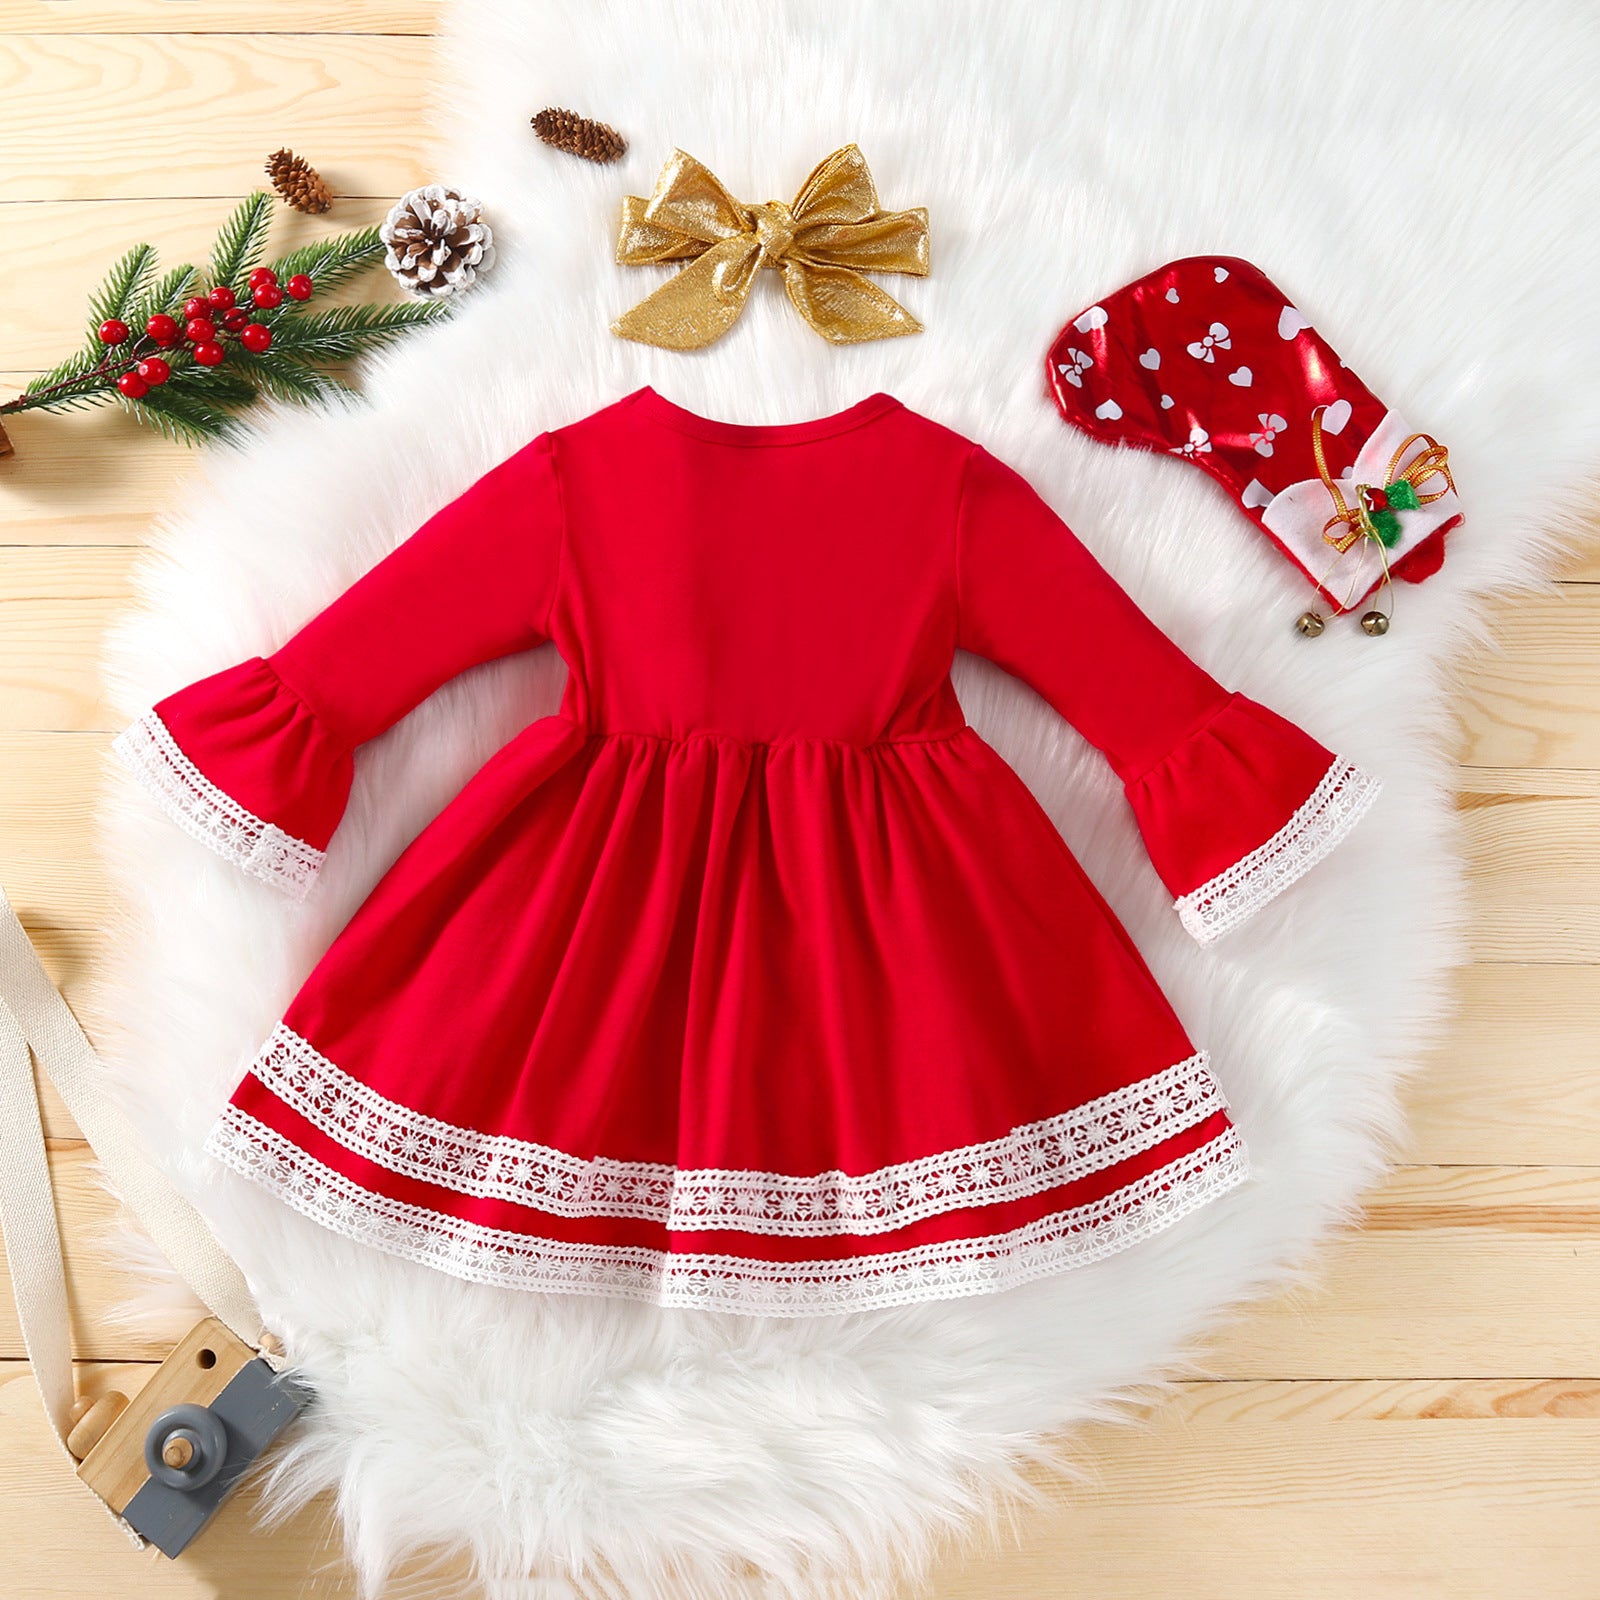 Girls Red Dress With White Trim, Christmas Dress, Christmas Pageant, OOC,  Party, Fancy, Clothing, Boutique, Sleeves, Toddler, Bows, Costume - Etsy